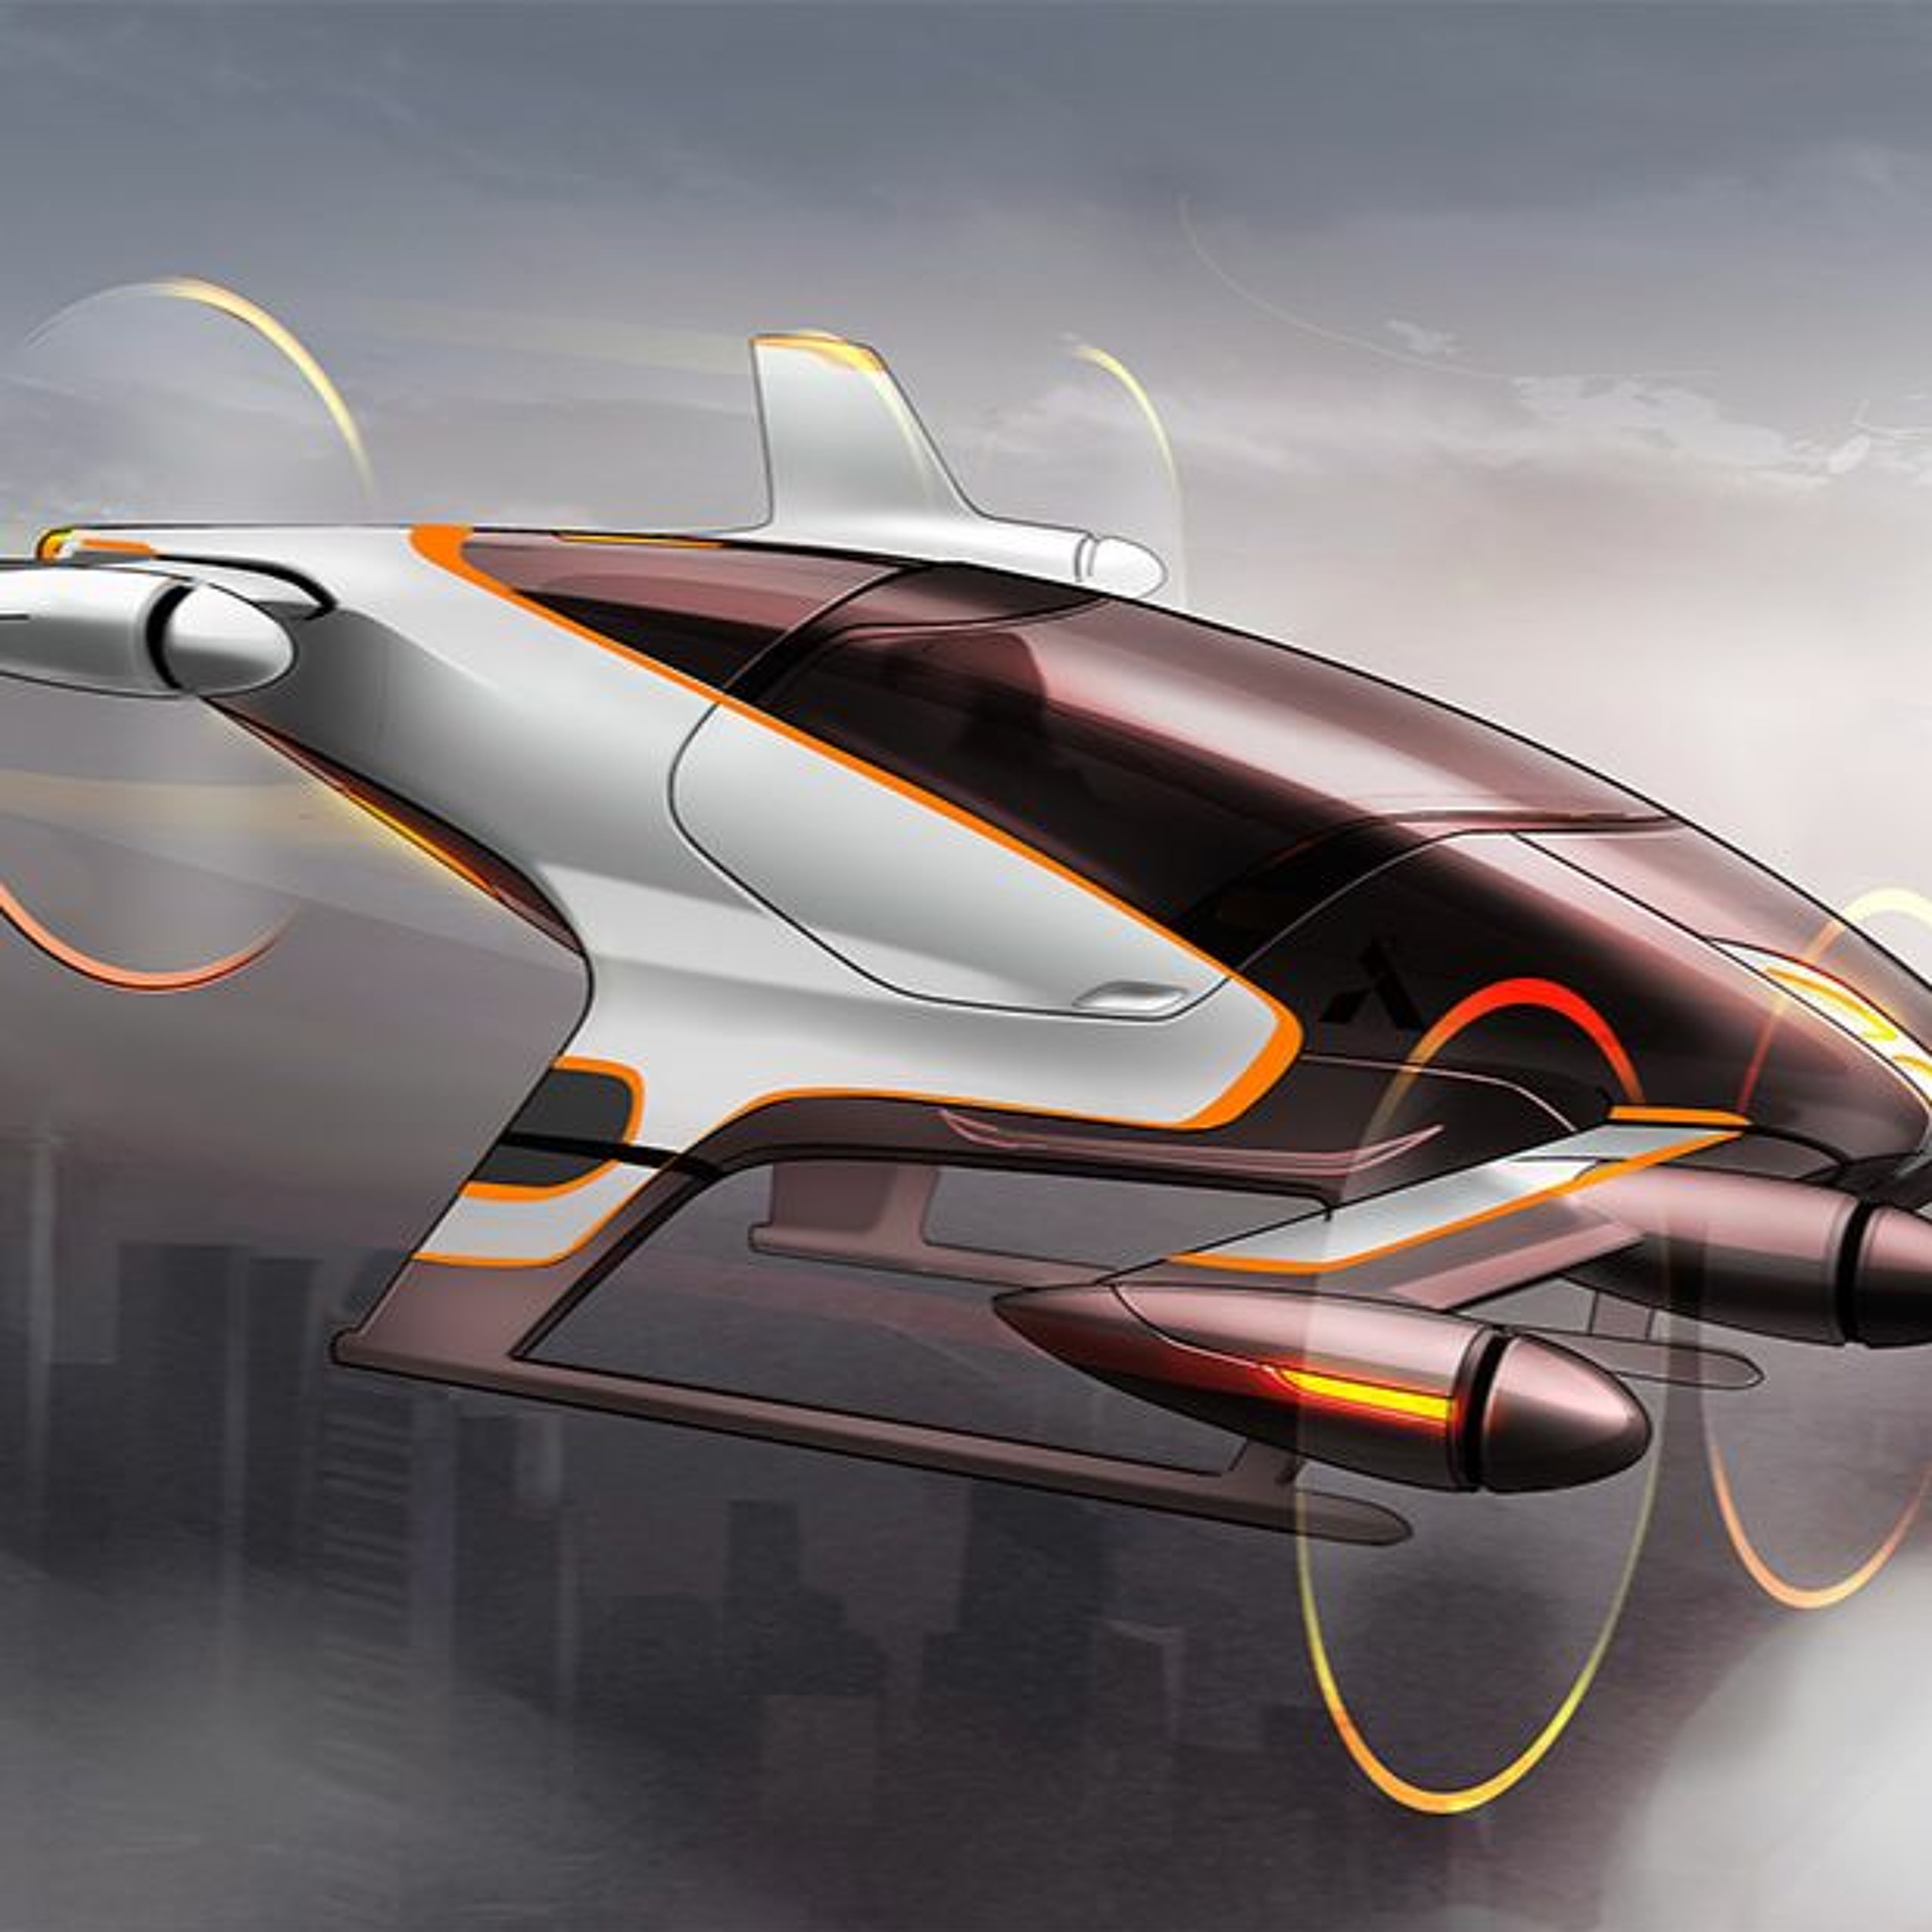 Ep. 23: How Airbus A³ Plans to Bring Autonomous Air Taxis to Urban Skies